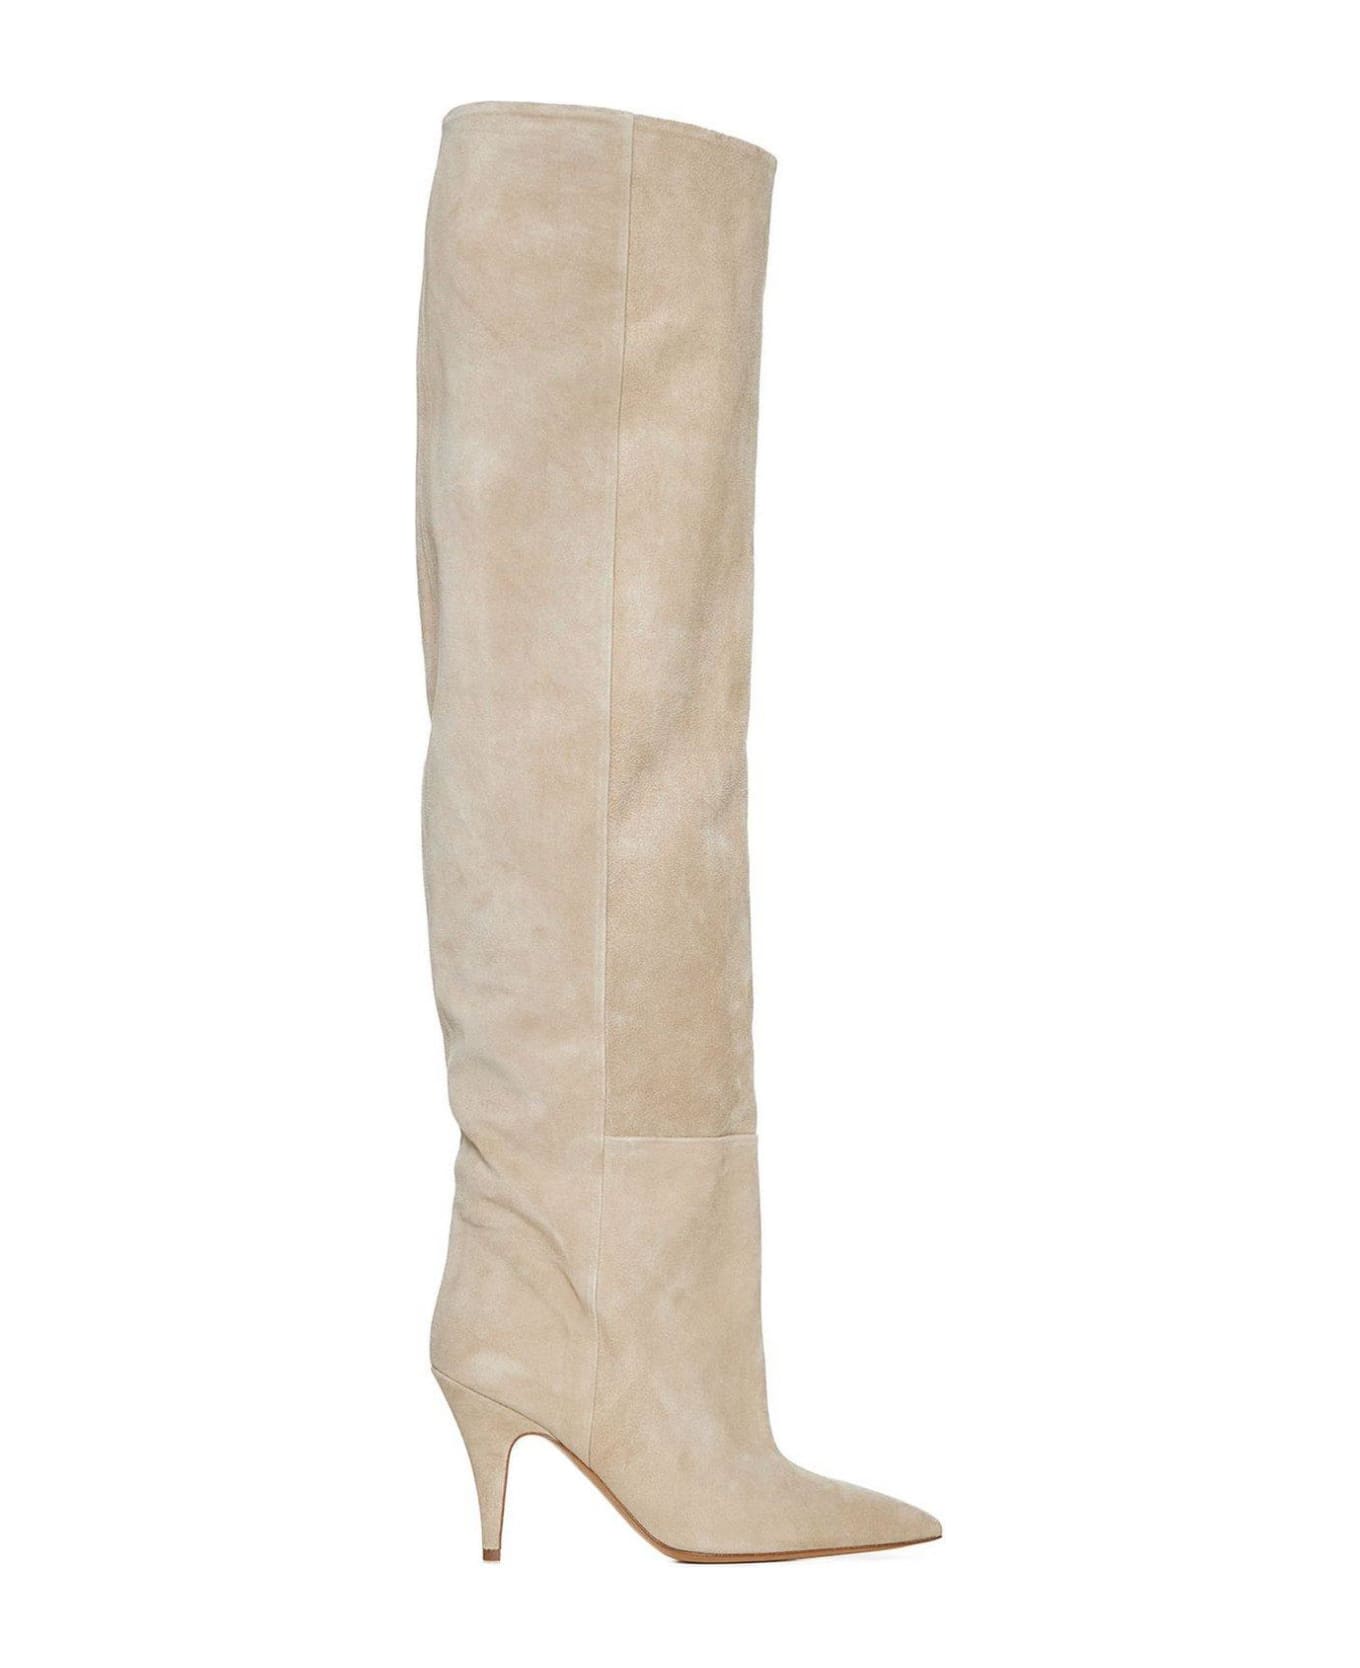 Khaite The River Pointed-toe Knee-high Boots - NUDE ブーツ